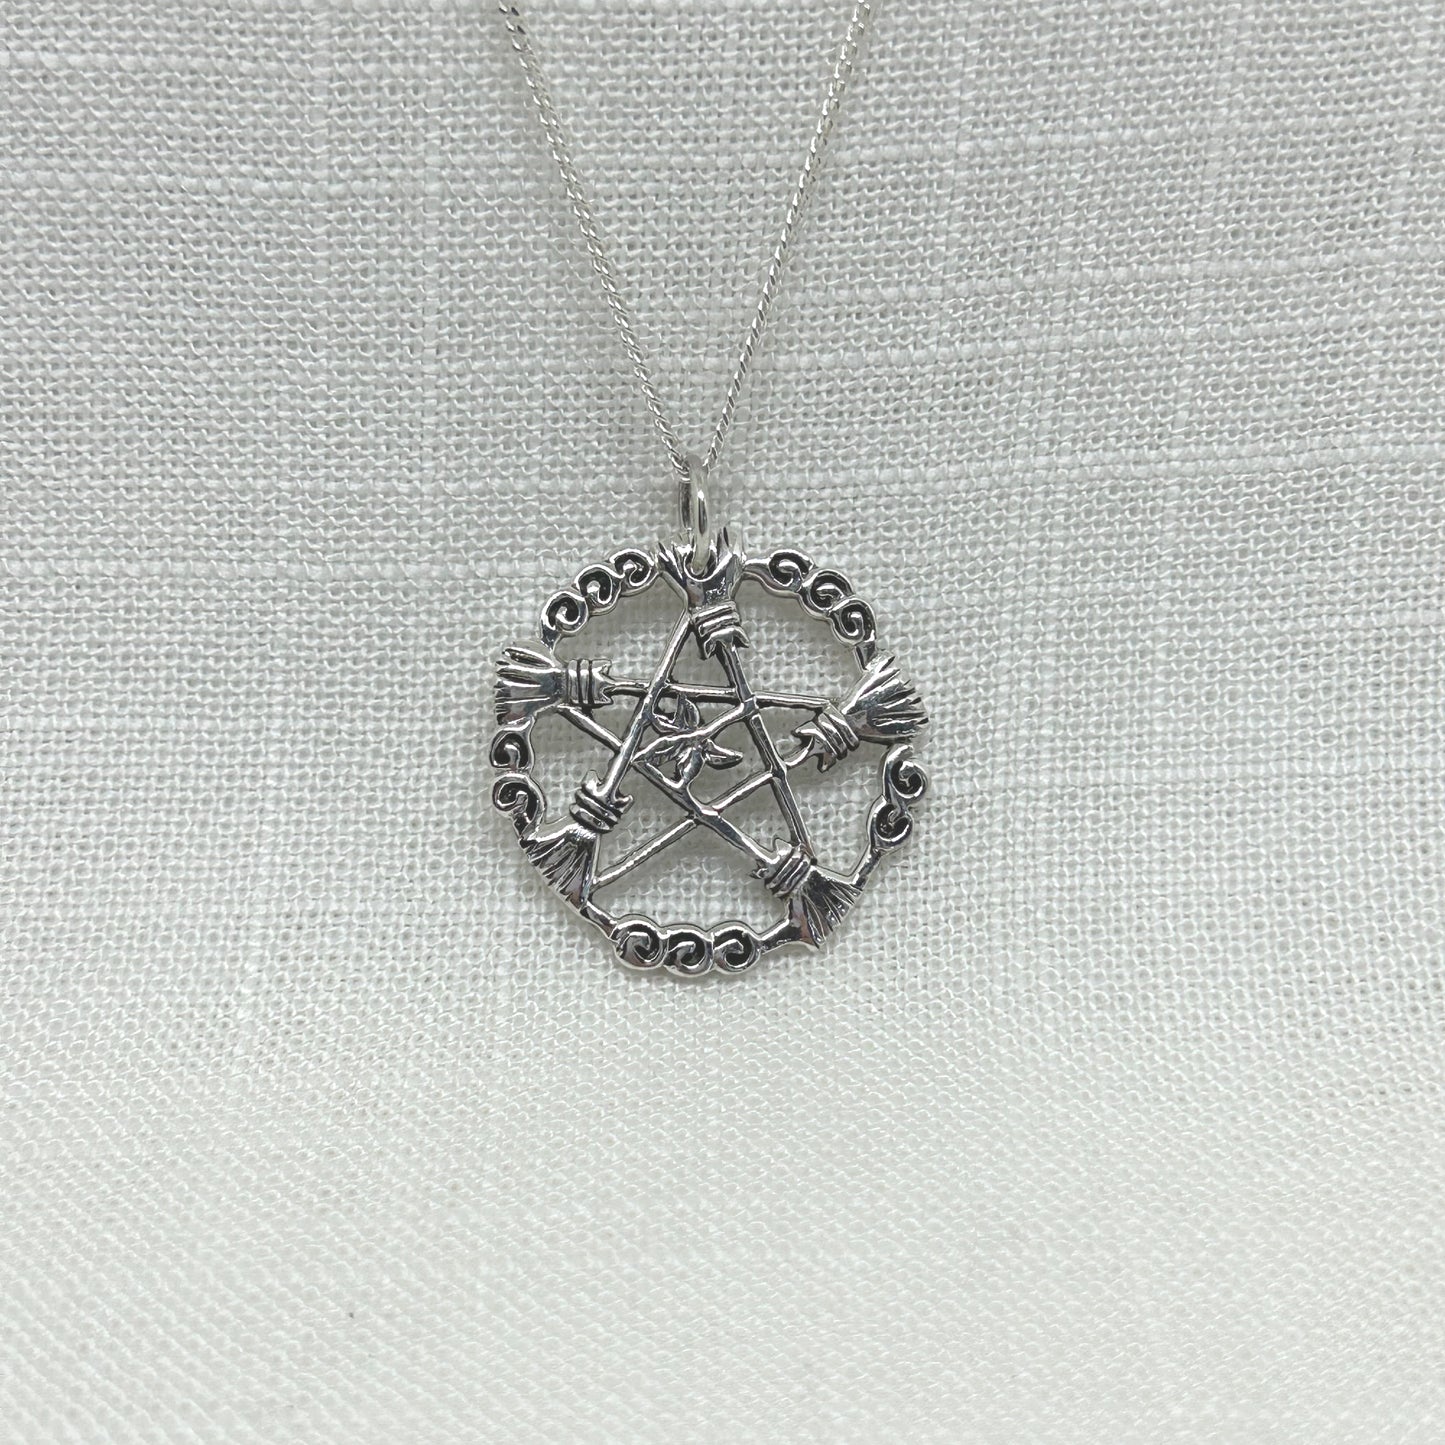 This pendant is a best seller with its detailed Besoms or Broomsticks of Elder in a Pentacle design encased in a Blackberry Vine circle with an Elder leaf in the centre. Approximately 2.9cm in long including the bale by 2.6cm wide. All pendants come supplied on a 20 inch Sterling Silver Curb Chain and are gift boxed. 